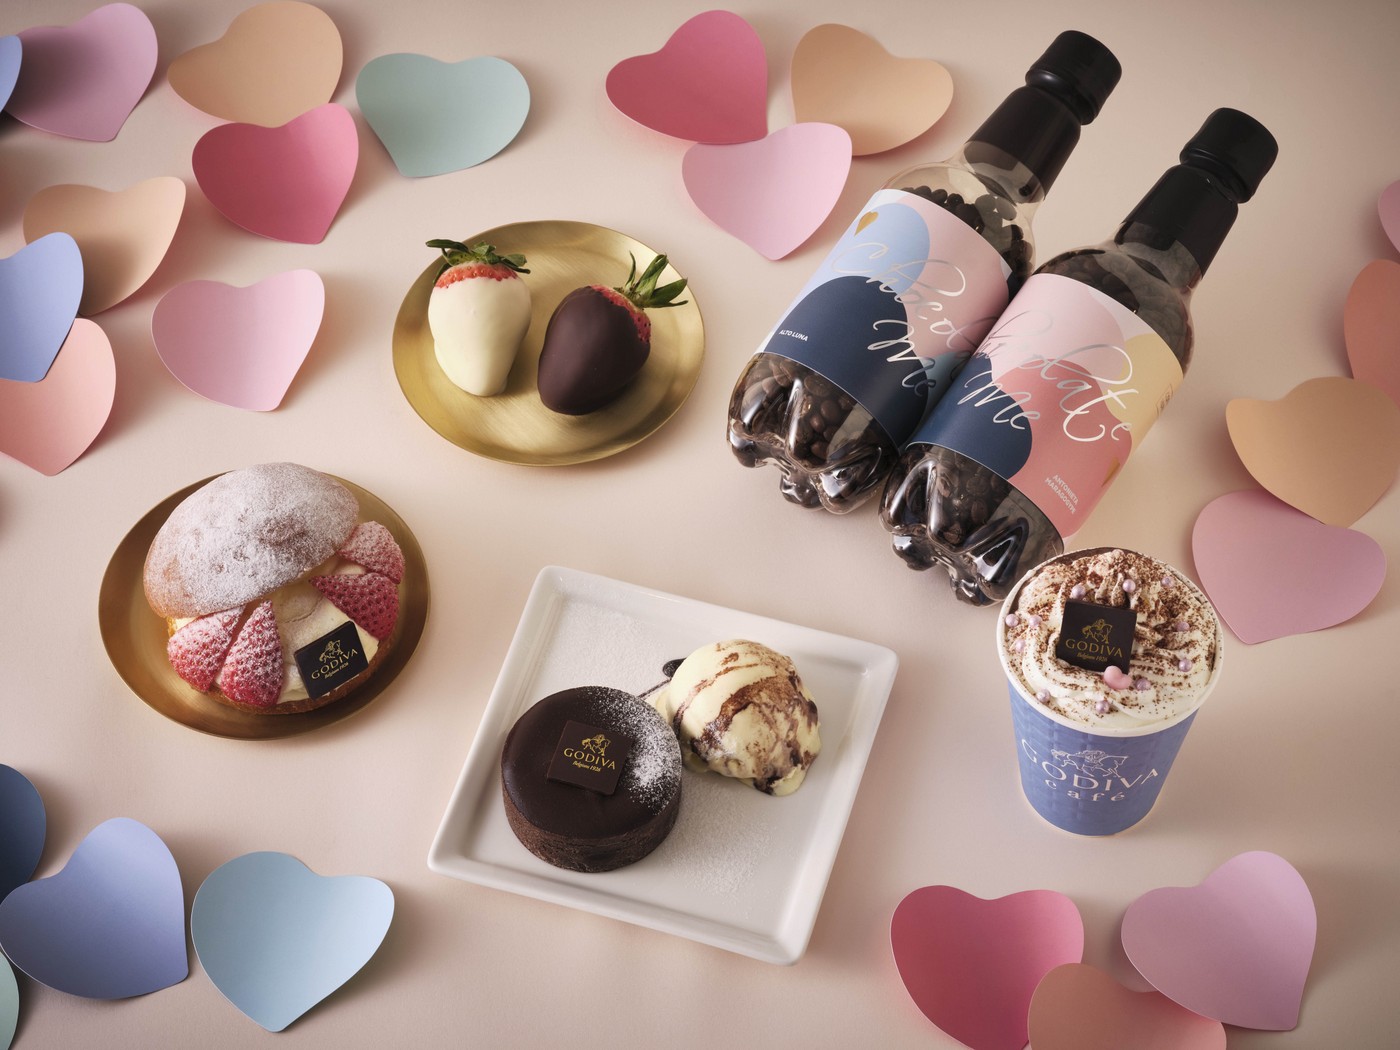 Godiva Cafe Features Seasonal Items for Valentine's Day Staring February 1